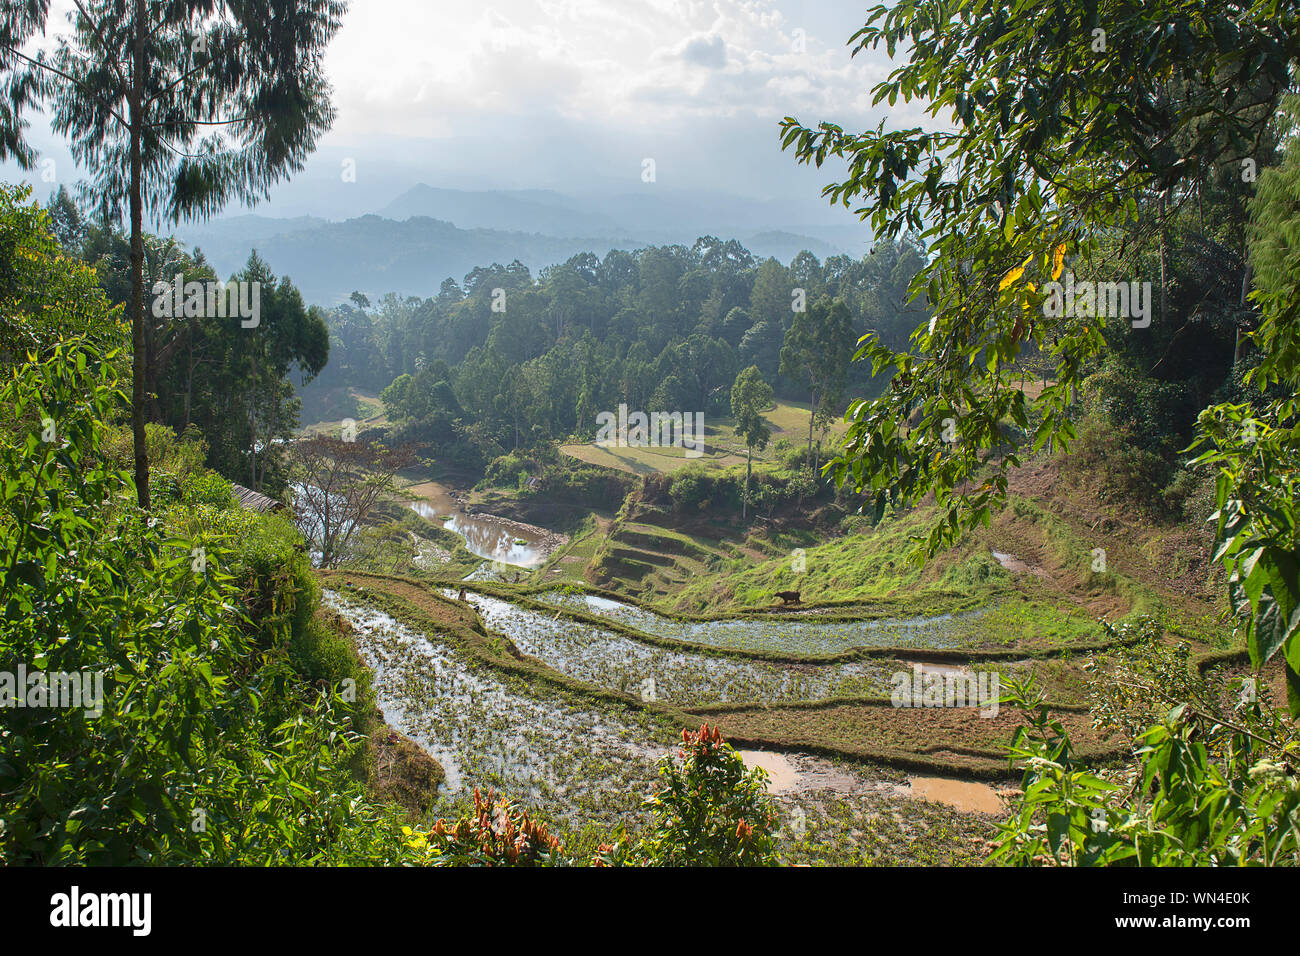 Green and brown rice terrace fields in Tana Toraja, South Sulawesi, Indonesia Stock Photo